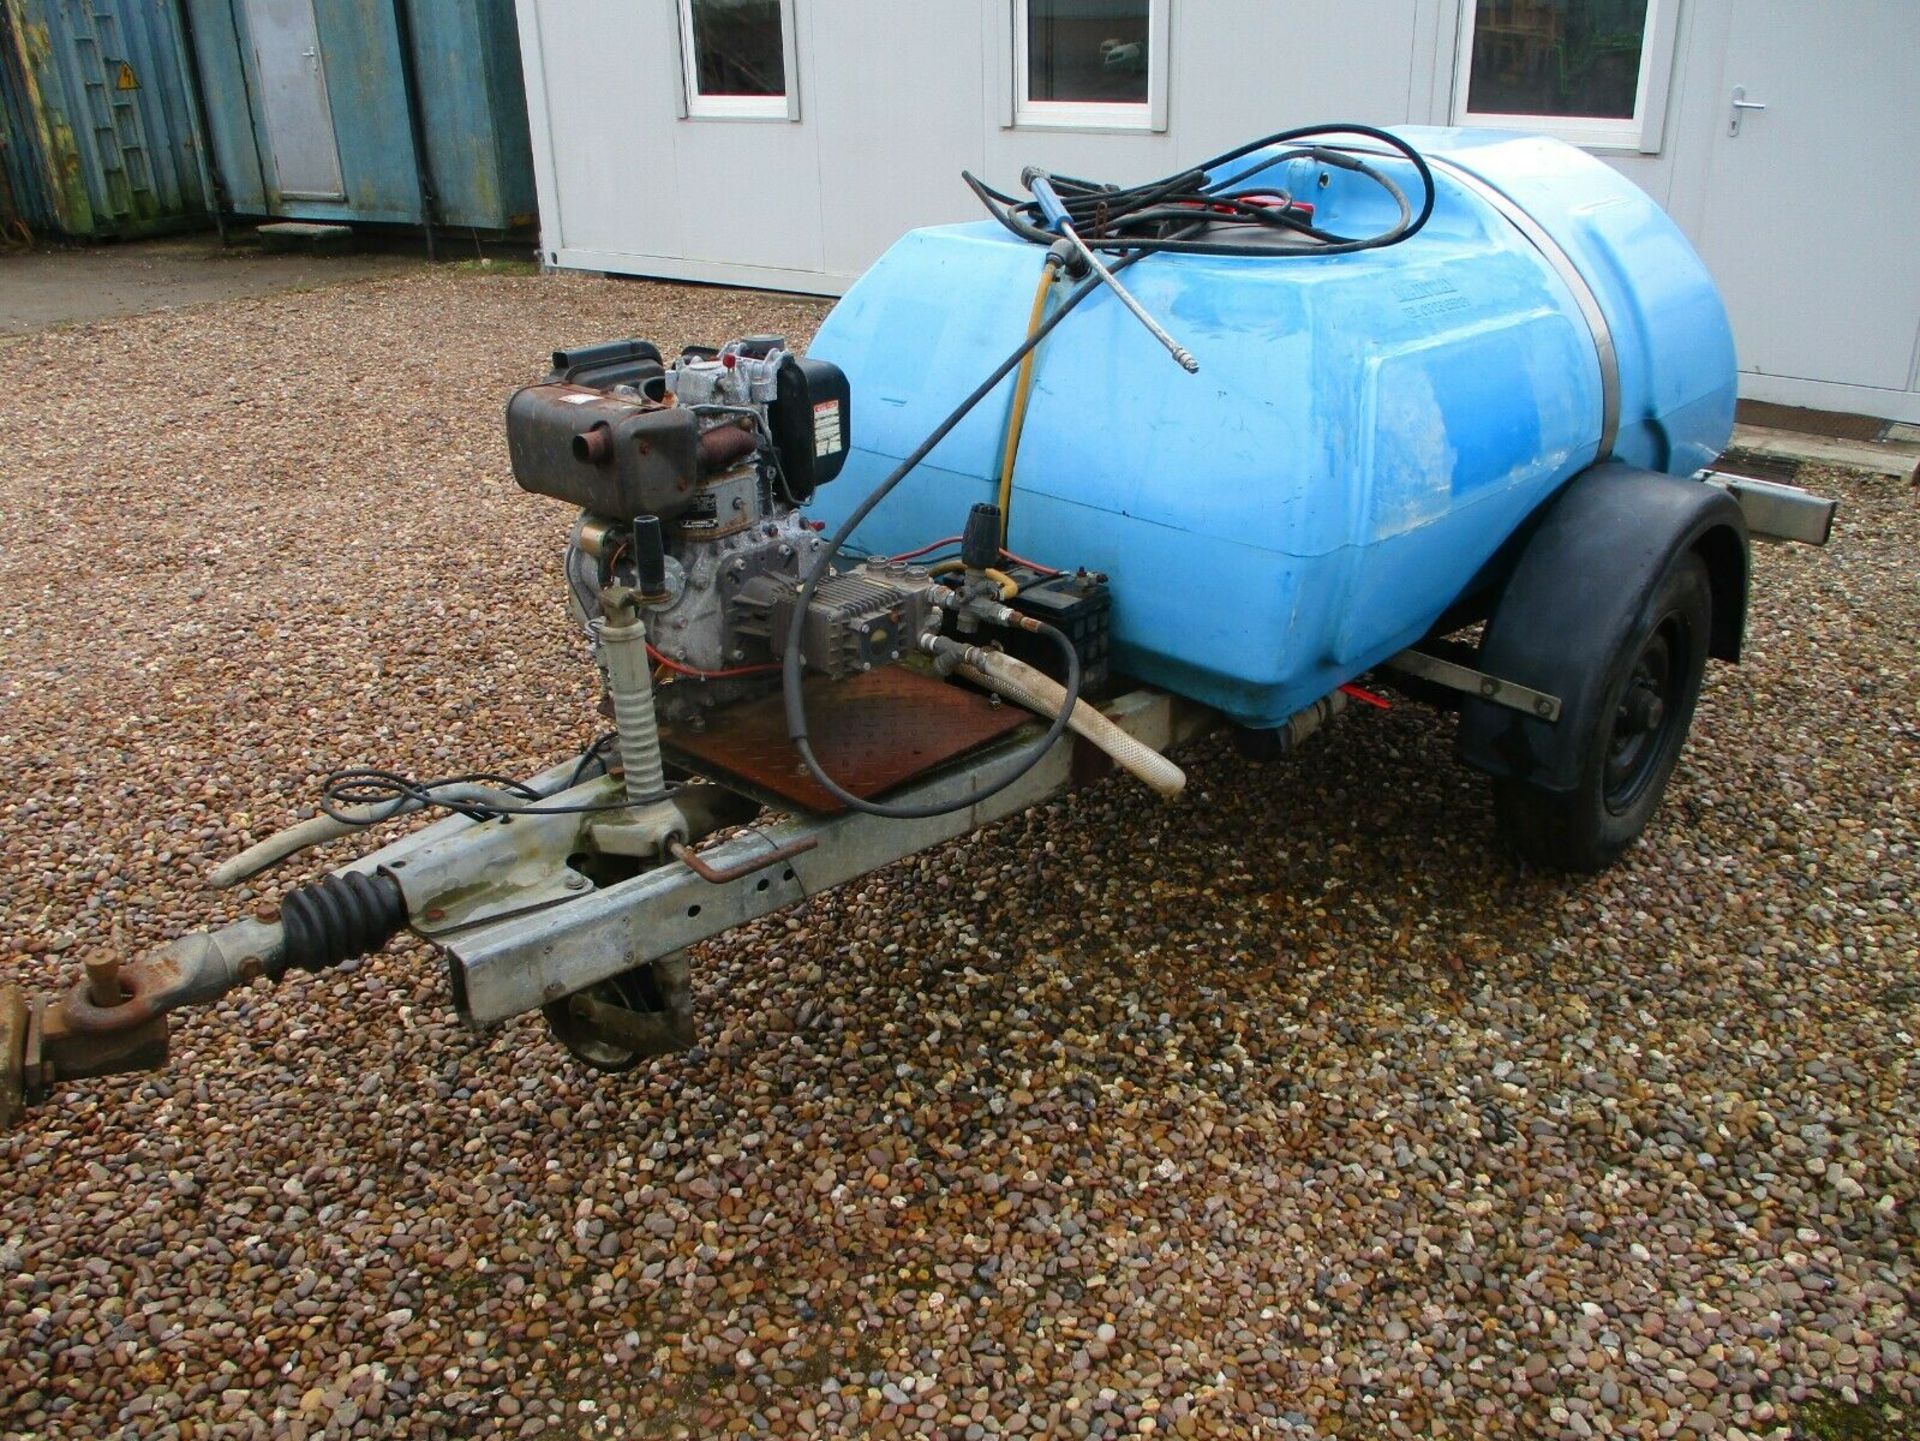 Towable bowser diesel power pressure washer - Image 3 of 7